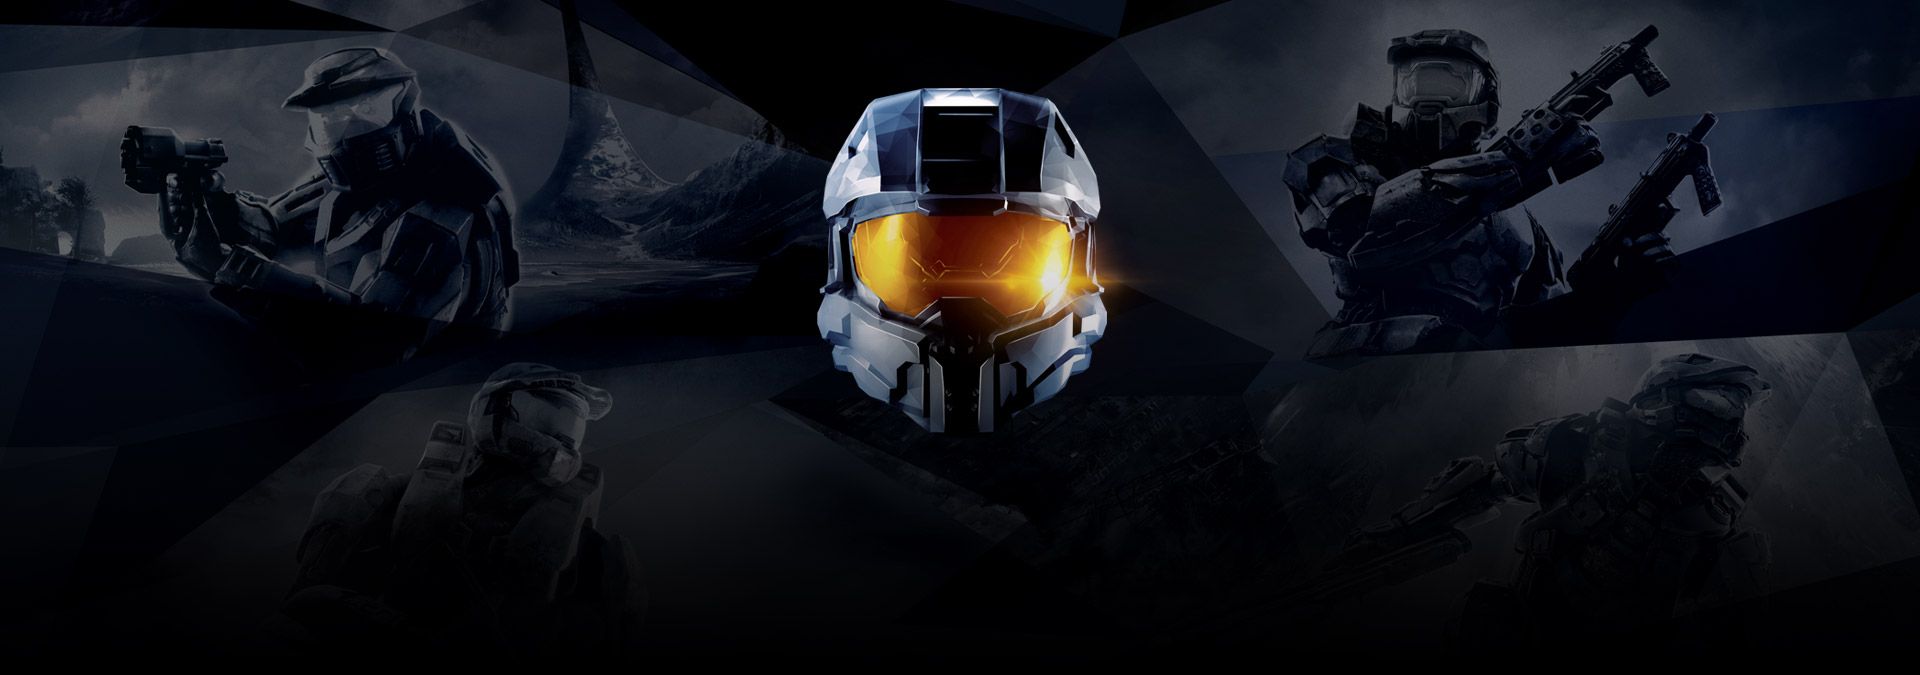 Halo: The Master Chief Collection wallpaper, Video Game, HQ Halo: The Master Chief Collection pictureK Wallpaper 2019